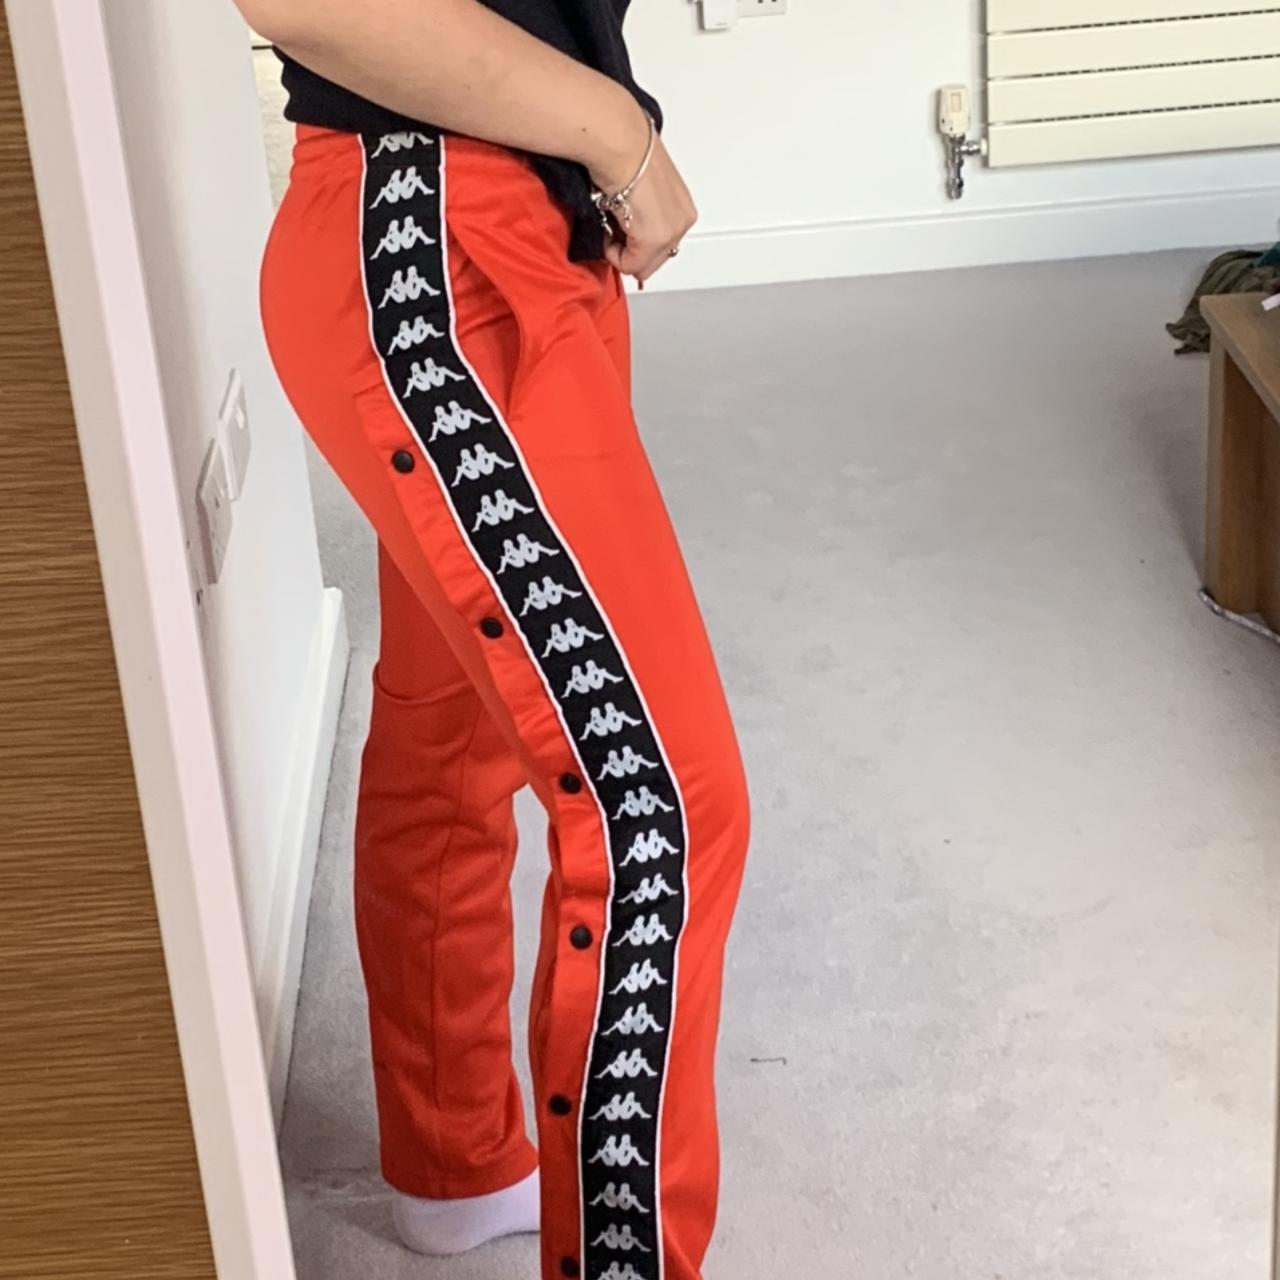 Kappa Wise Red Popper Track Pants  Urban Outfitters UK